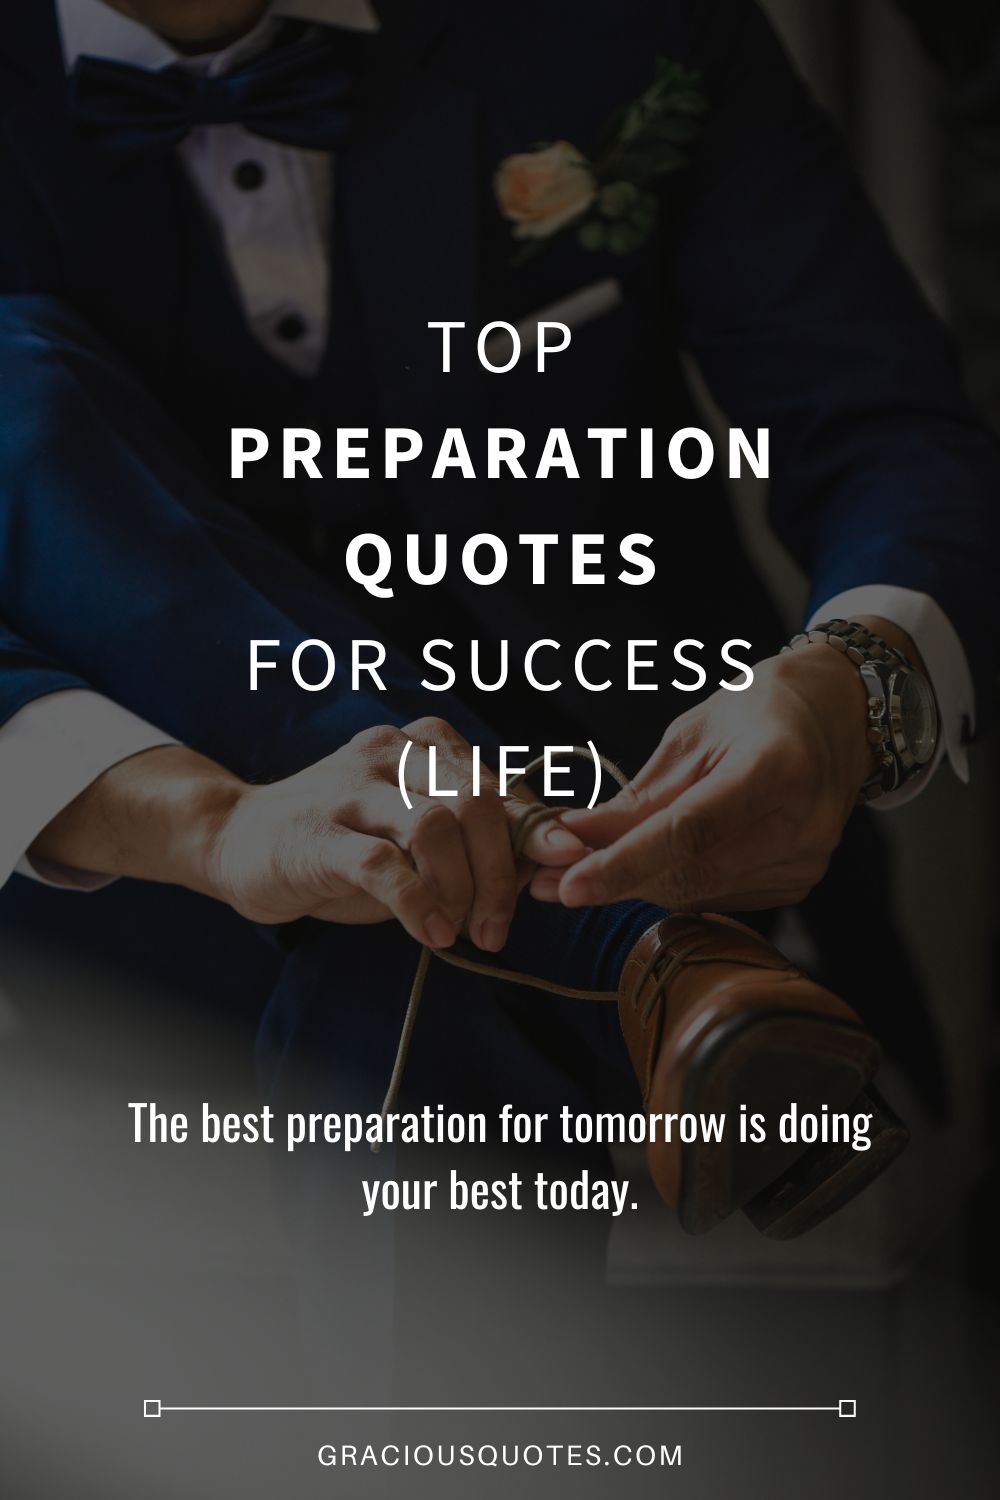 Top Preparation Quotes for Success (LIFE) - Gracious Quotes